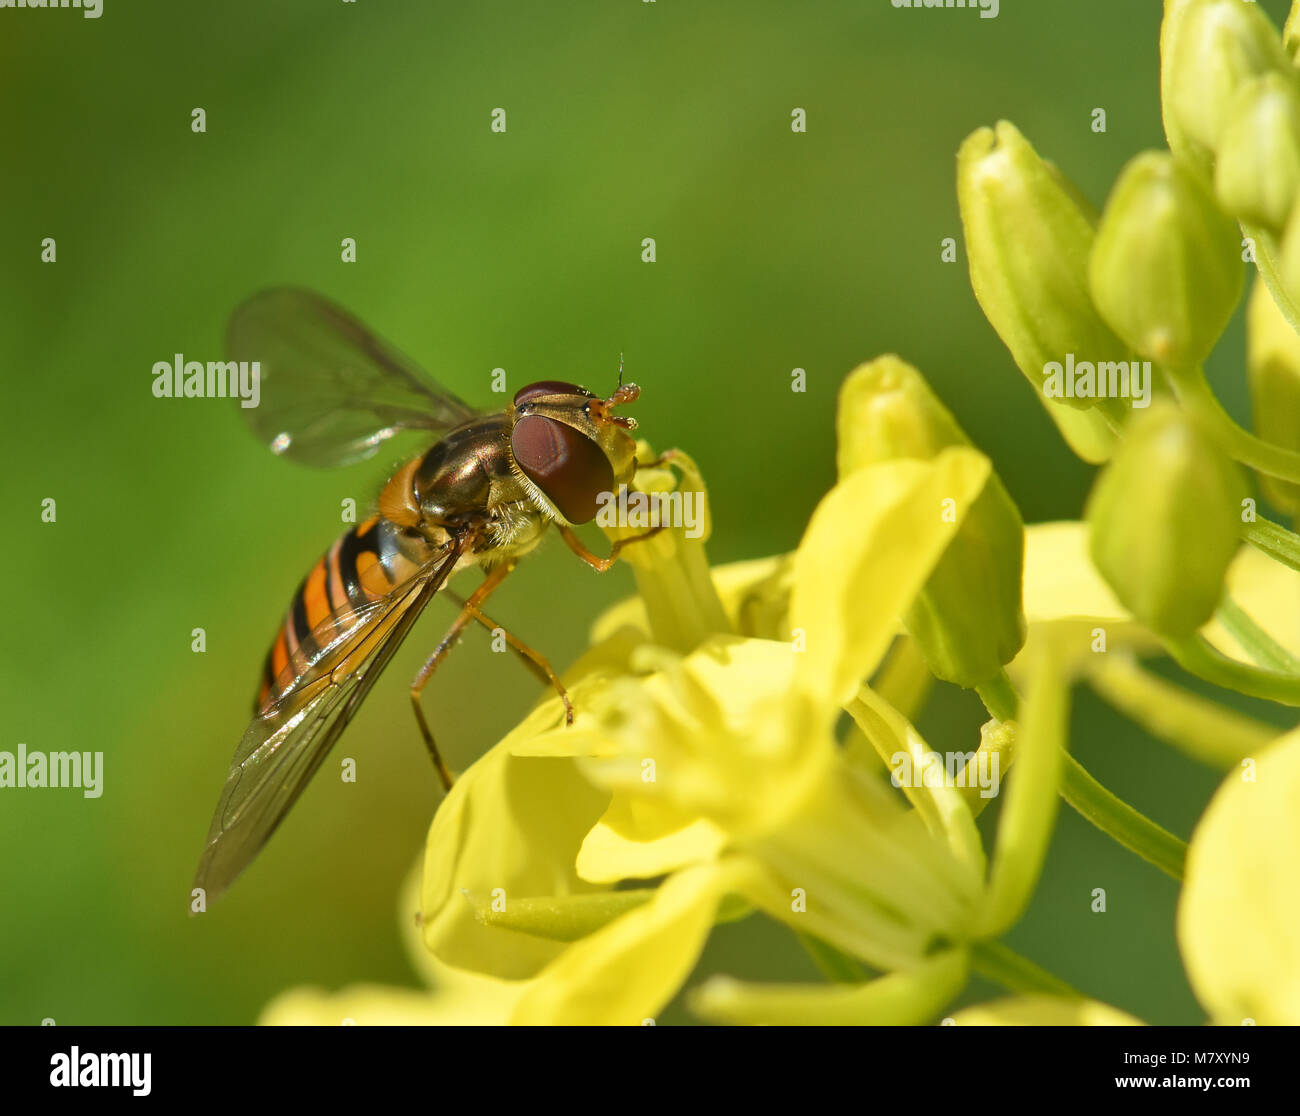 Hoverfly on flower Stock Photo